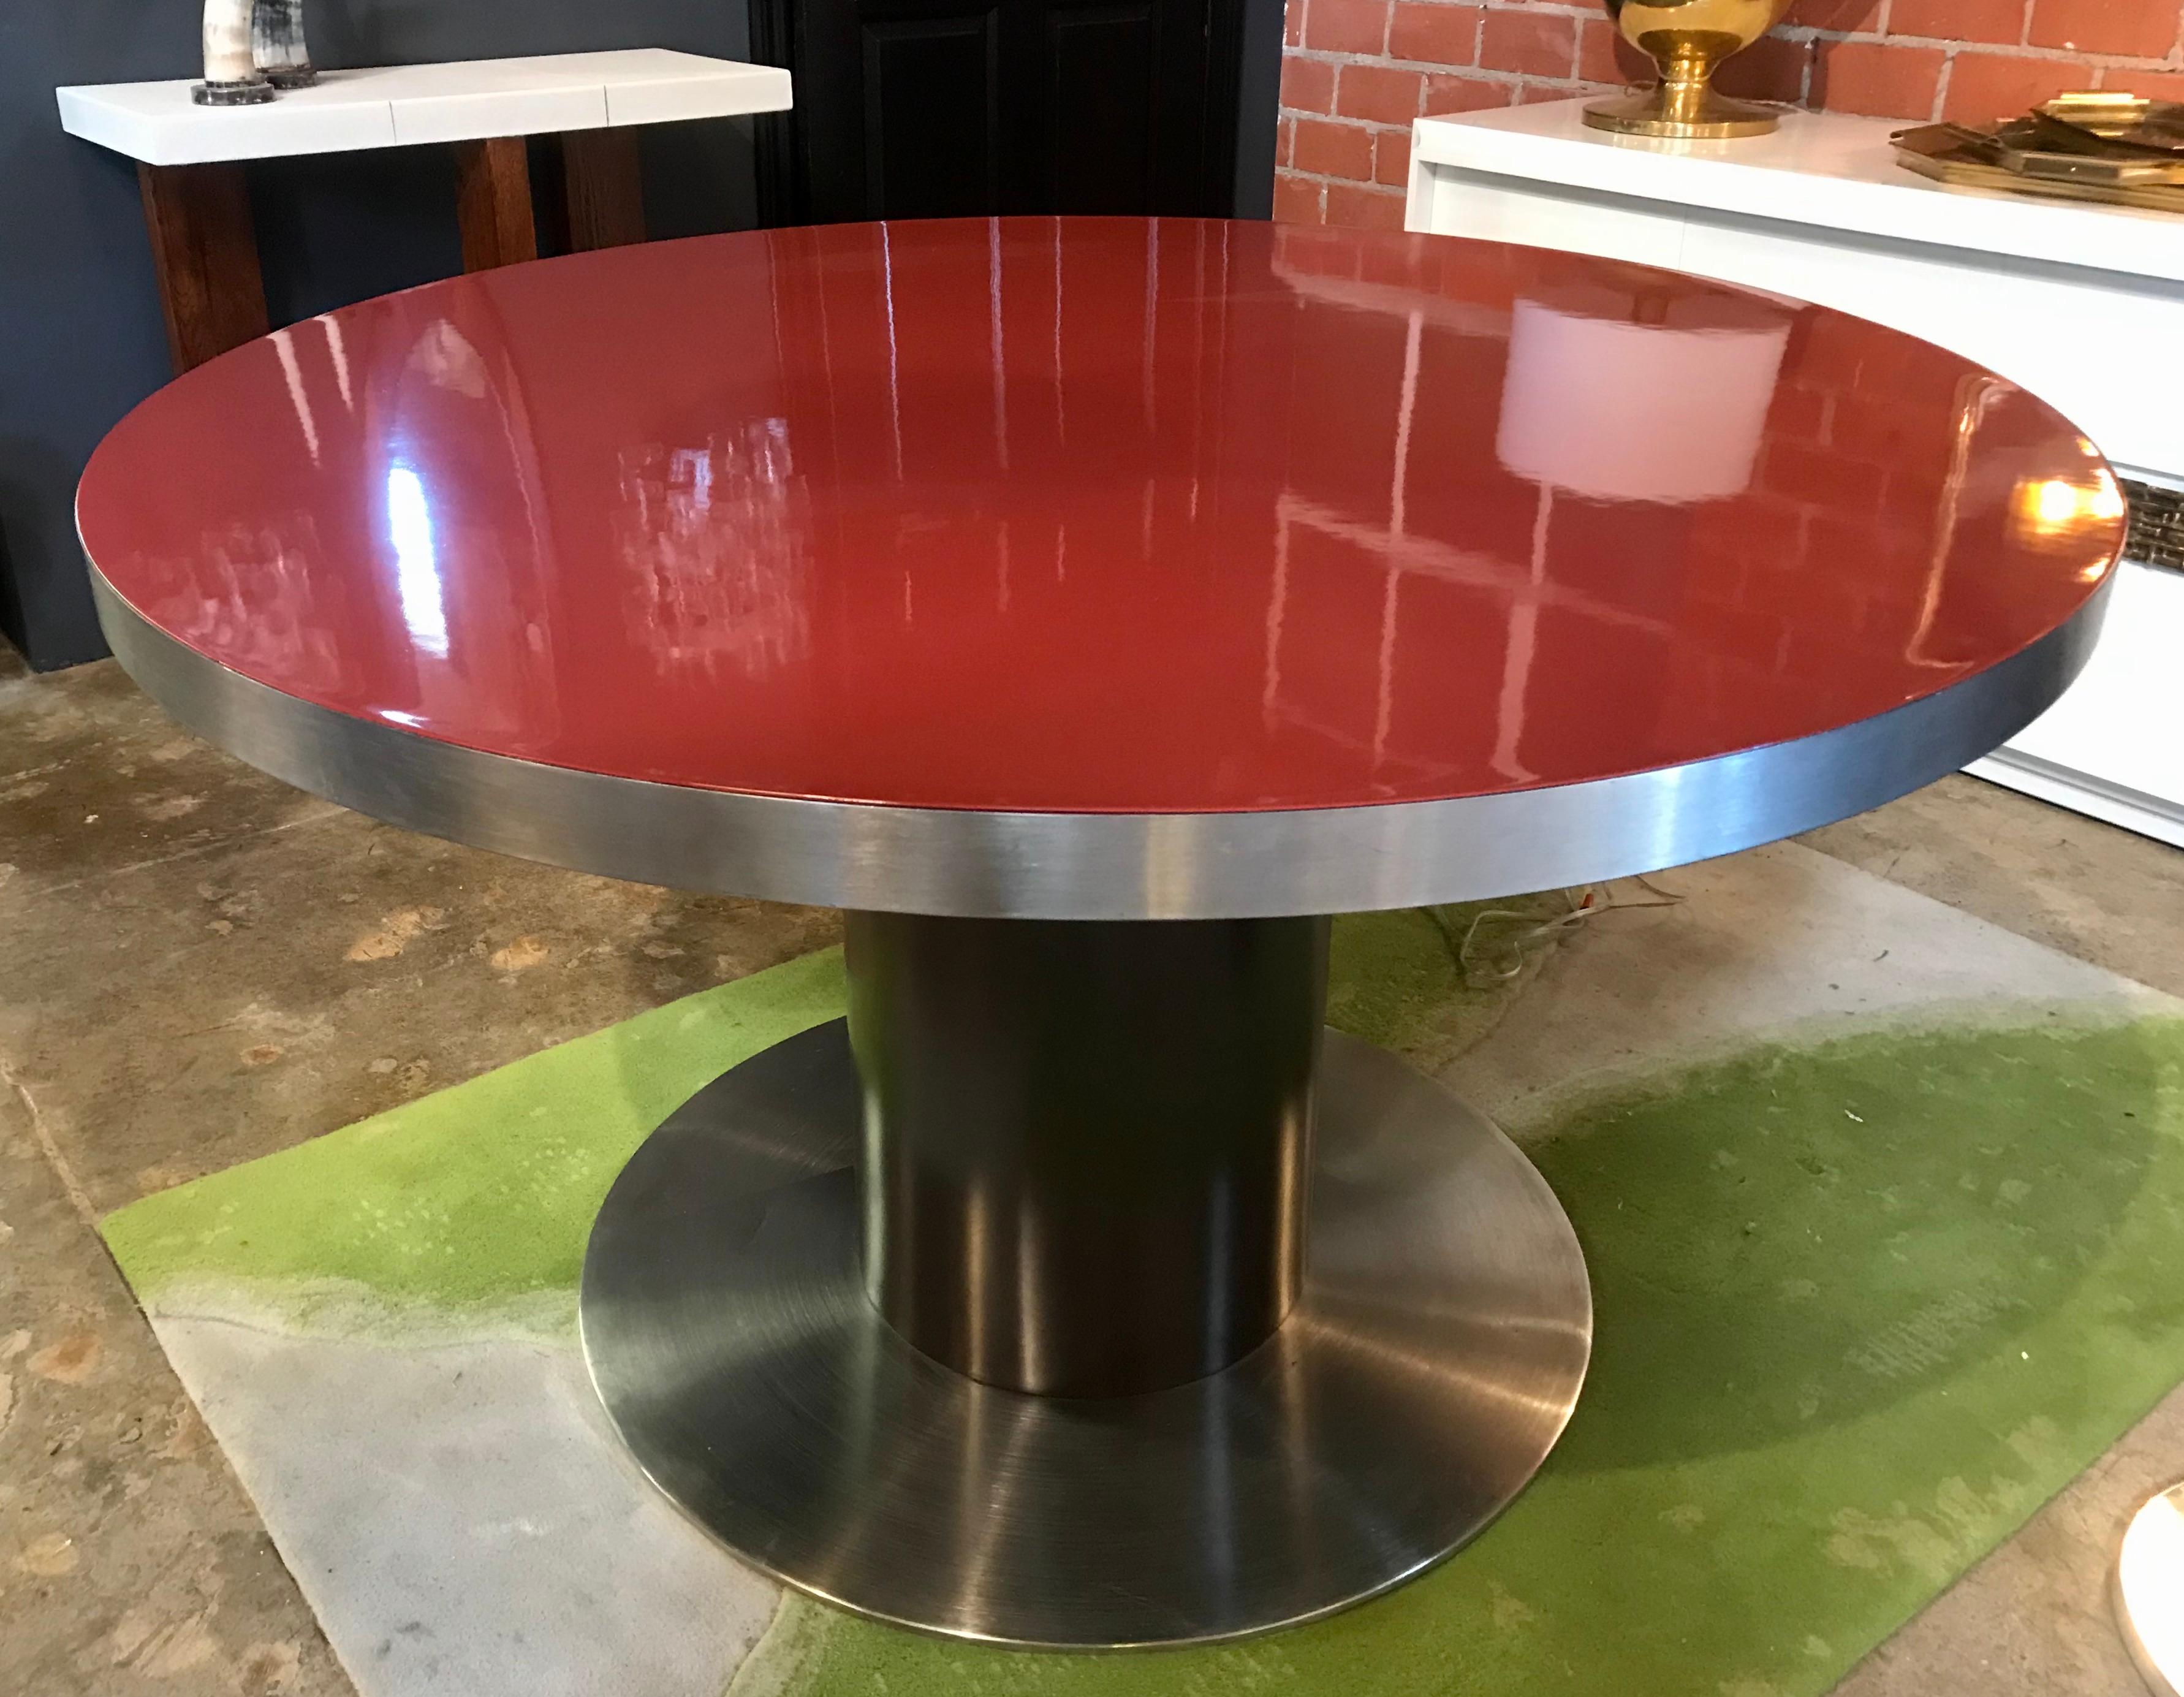 A rare glamorous polished stainless steel and red top dining table designed by Willy Rizzo in the 1970s.
The table (diameter 51 in.) a polished stainless steel disk that secures the top to the polished stainless steel base.
The diameter of the